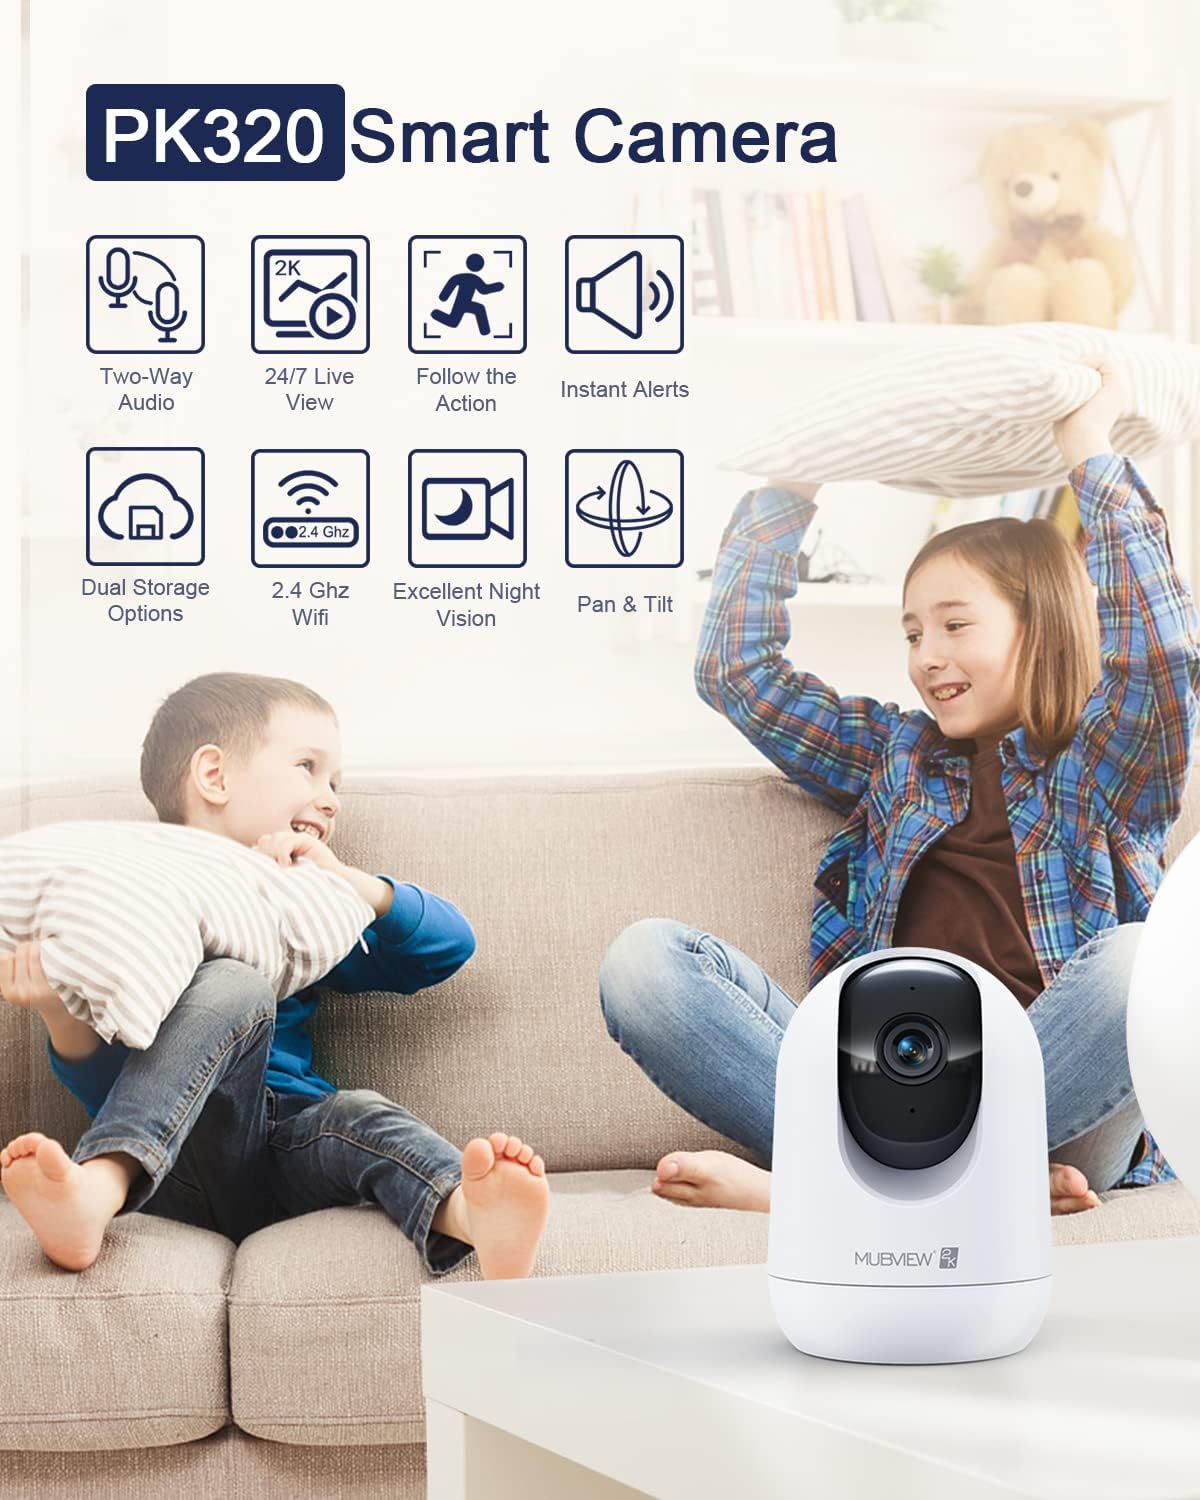 Estimate of Indoor Security Camera 2K, Pet Camera with Phone App, WiFi Cameras for Home Security Camera for Dog/ Baby Monitor/Elder Pan Tilt, 2.4G, 24/7